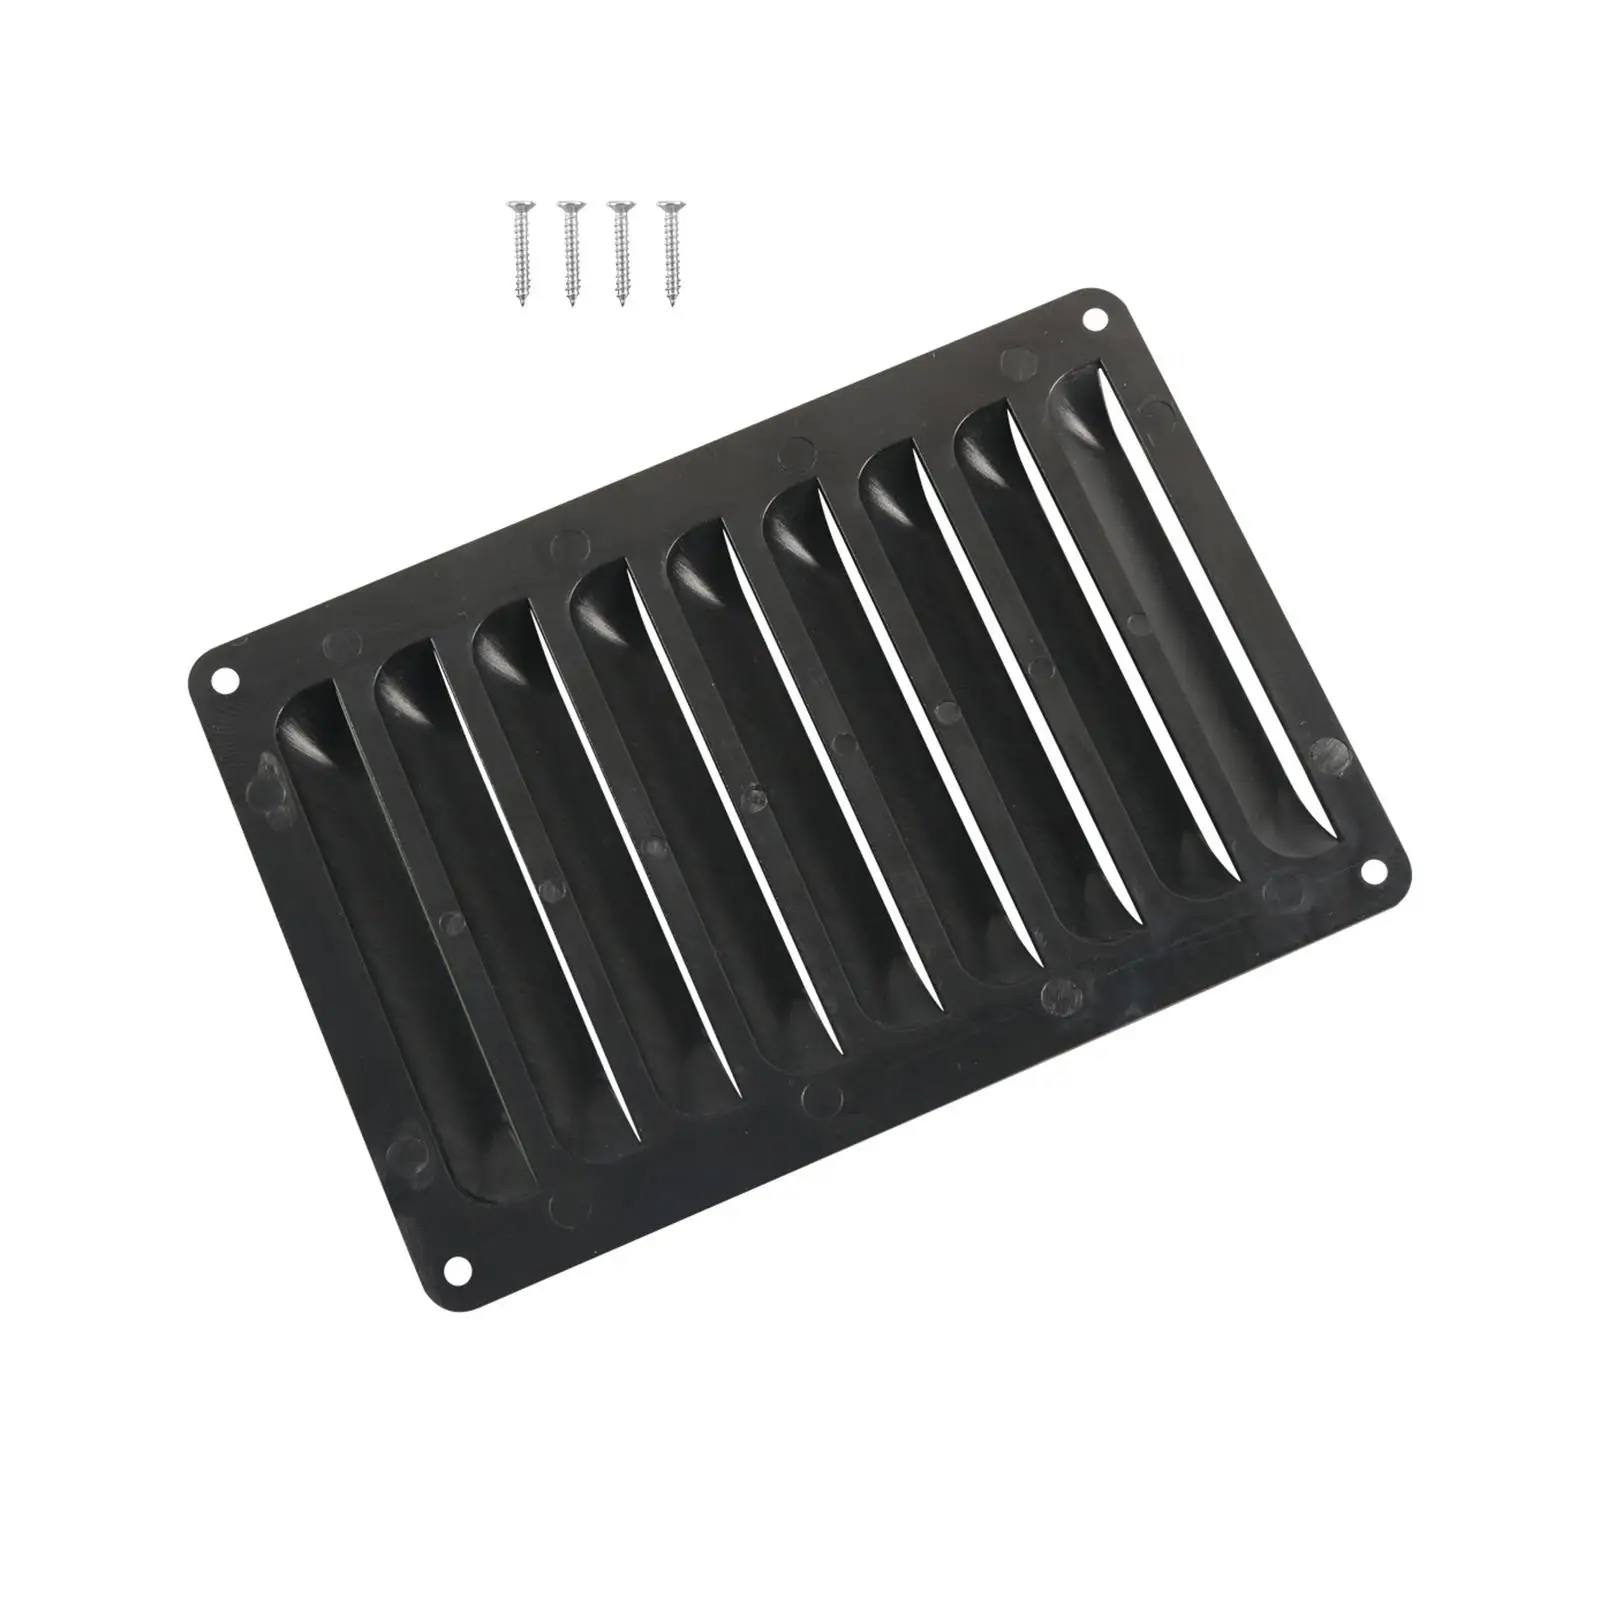 Air Vent Grille Accessories Replacement Part Cover Tool with Screws Black Supply for Motorhome Camping Camper Traveling